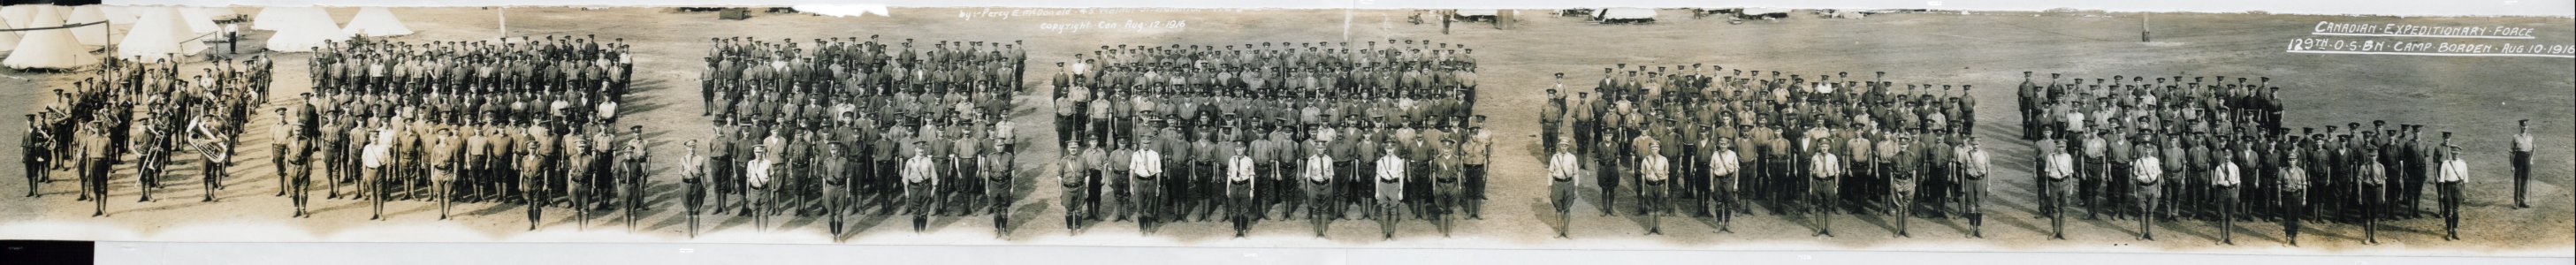 Canadian Expeditionary Force, 129th O.S. Battalion, Camp Borden, August 10, 1916 (HS85-10-32559) original photo